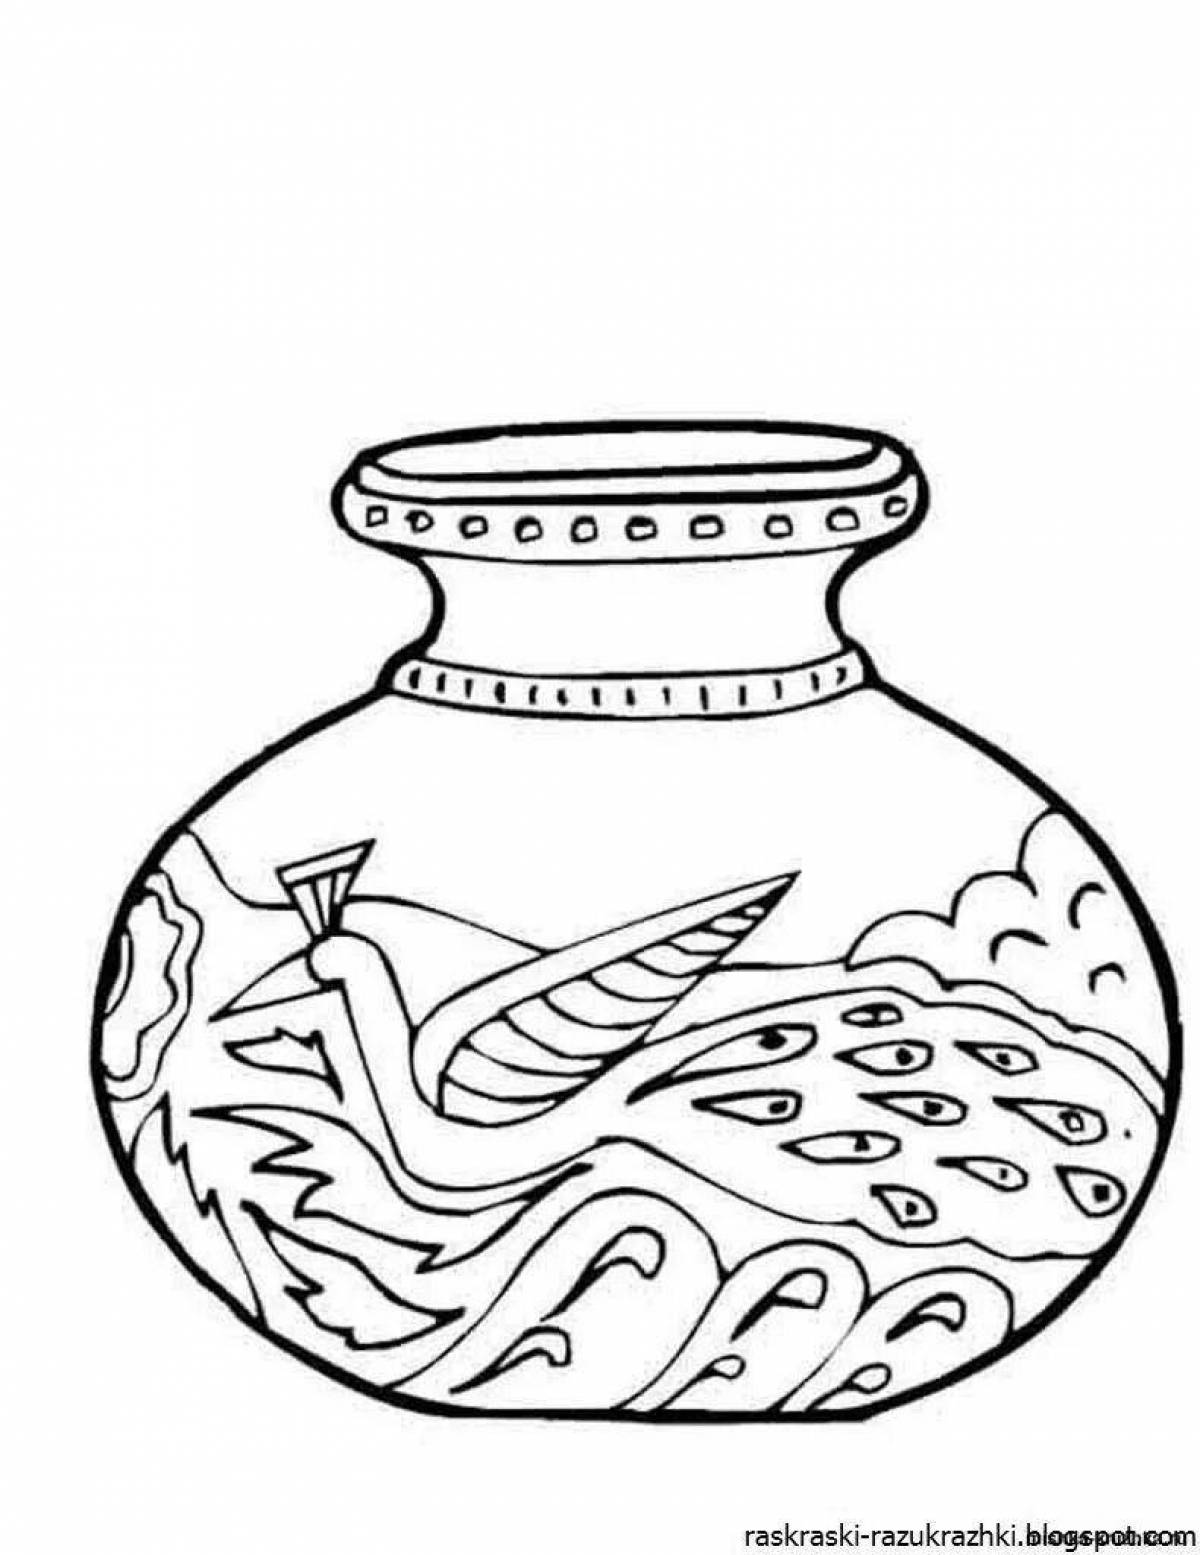 Coloring book shining vase for students